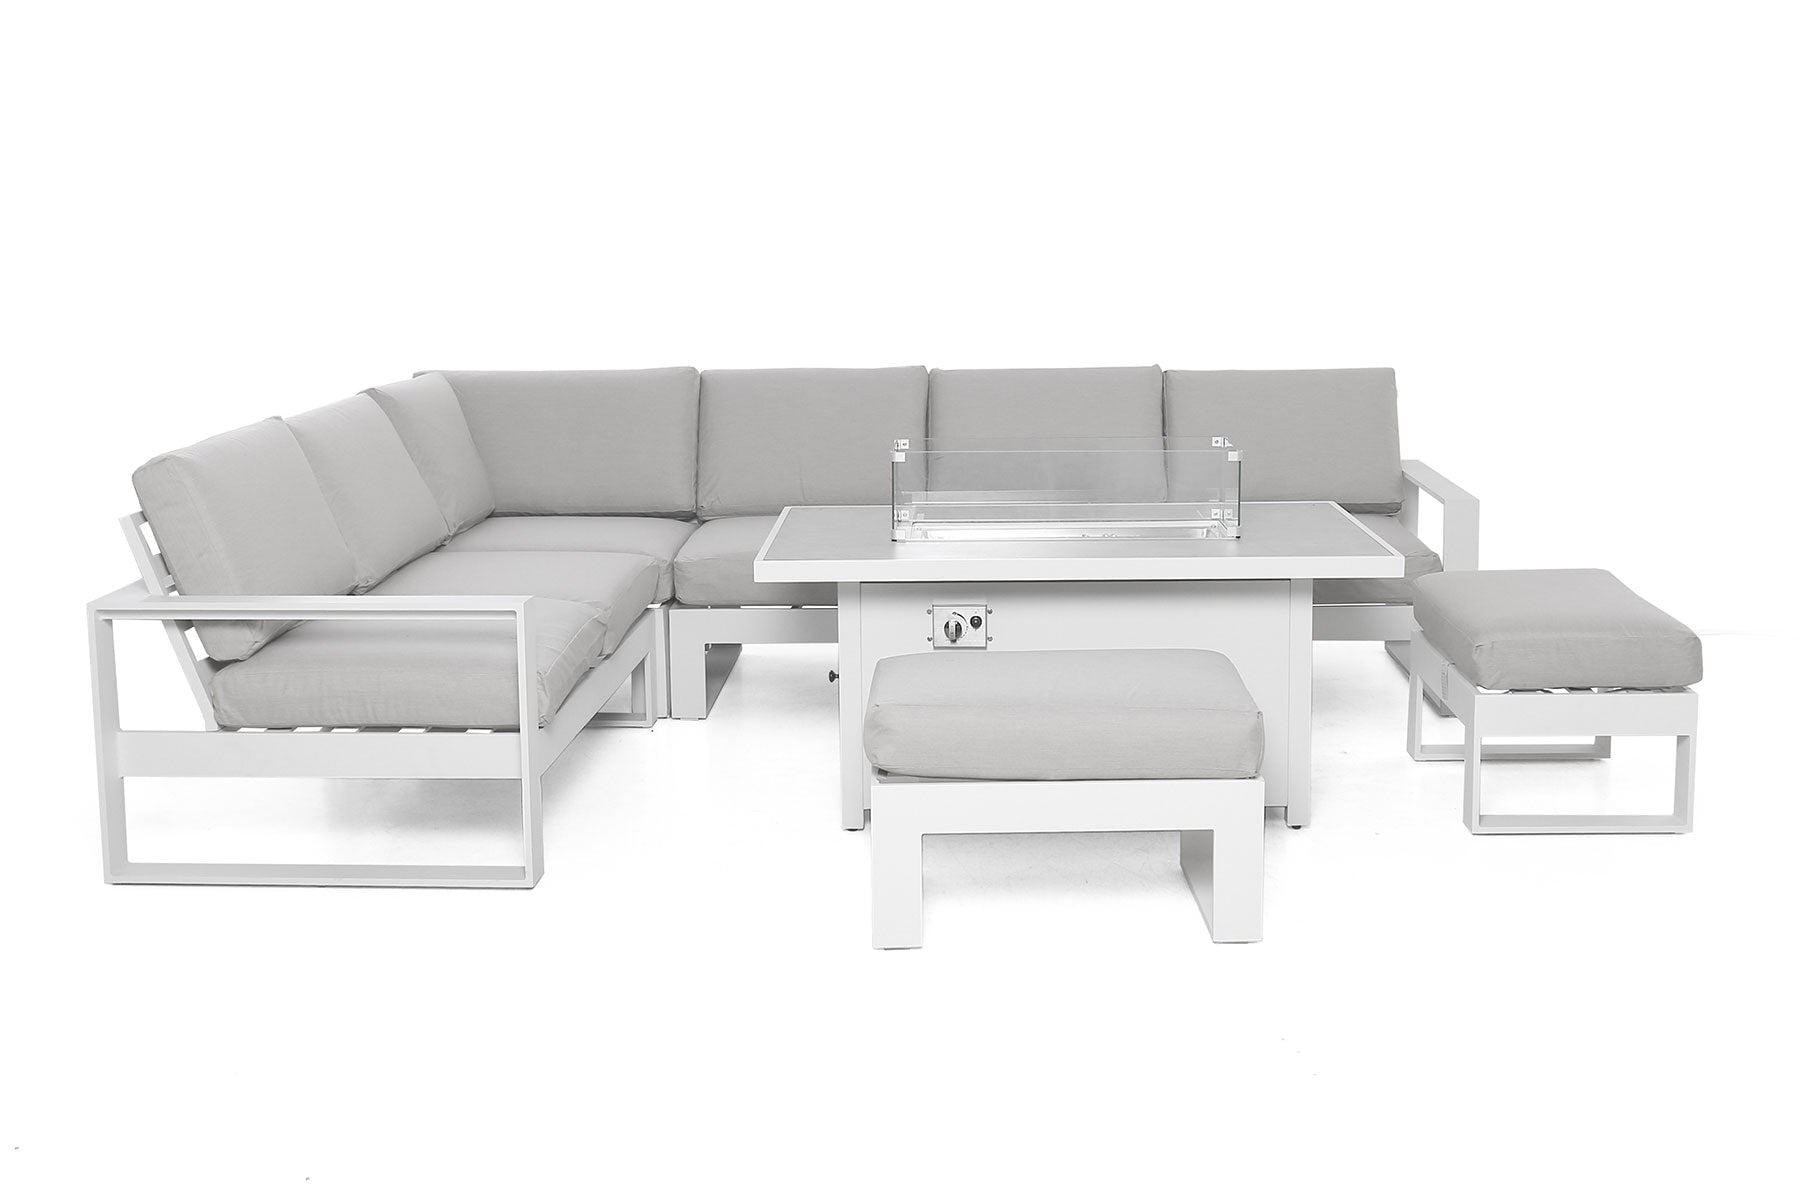 Amalfi Large Corner Dining with Rectangular Fire Pit Coffee Table
(includes 2x footstools) | White